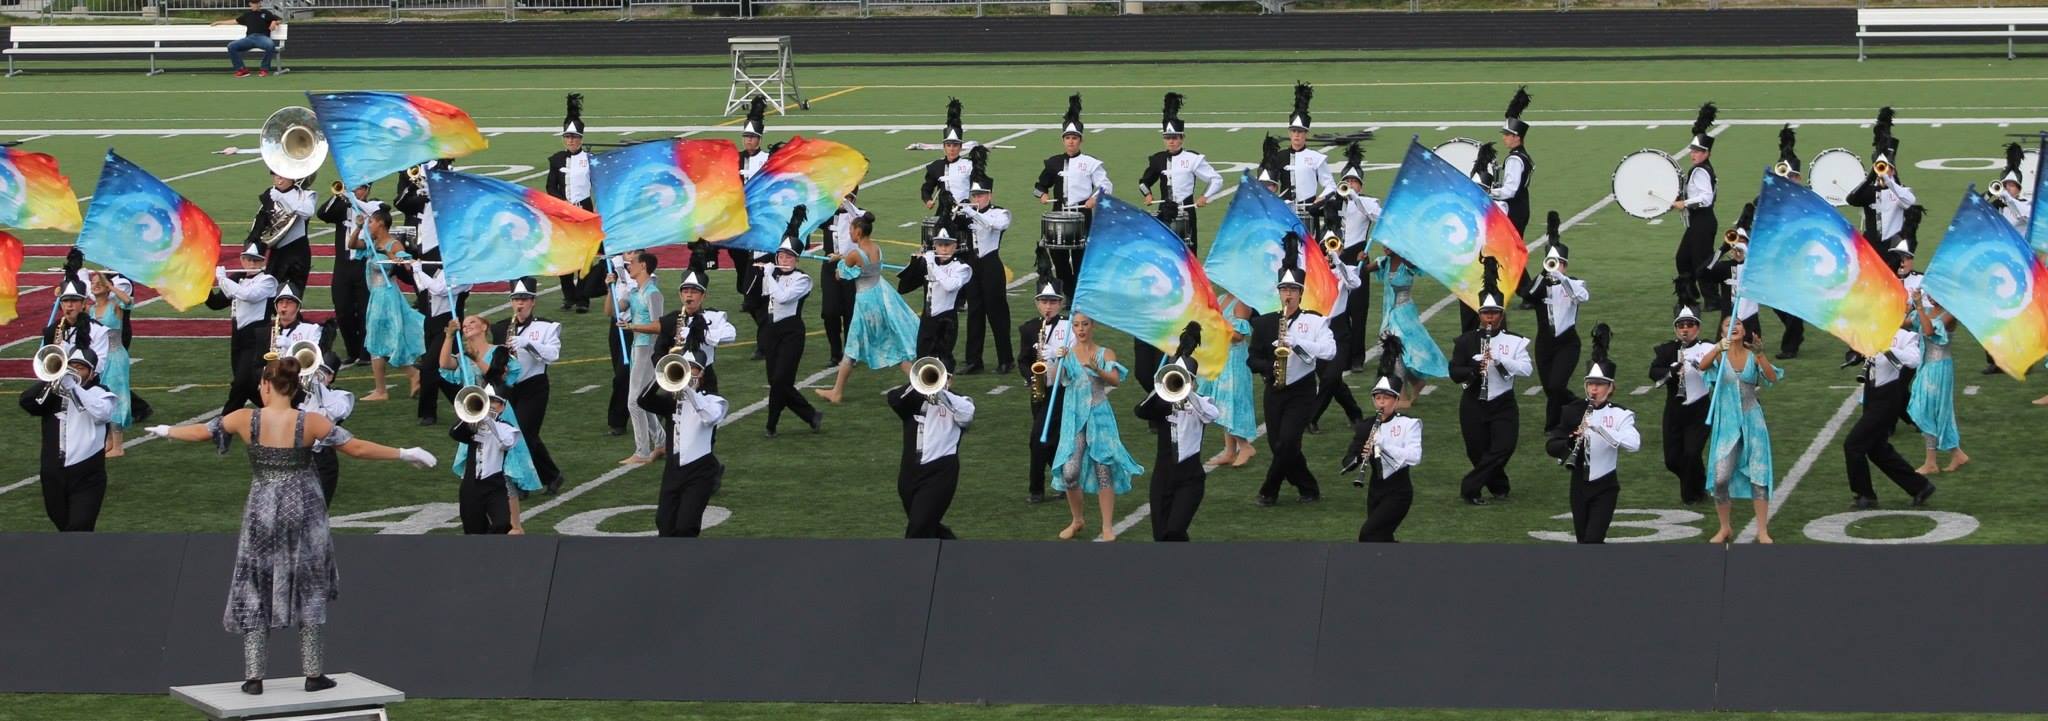 PLD+Marching+Band+Earns+Grand+Champions+Title